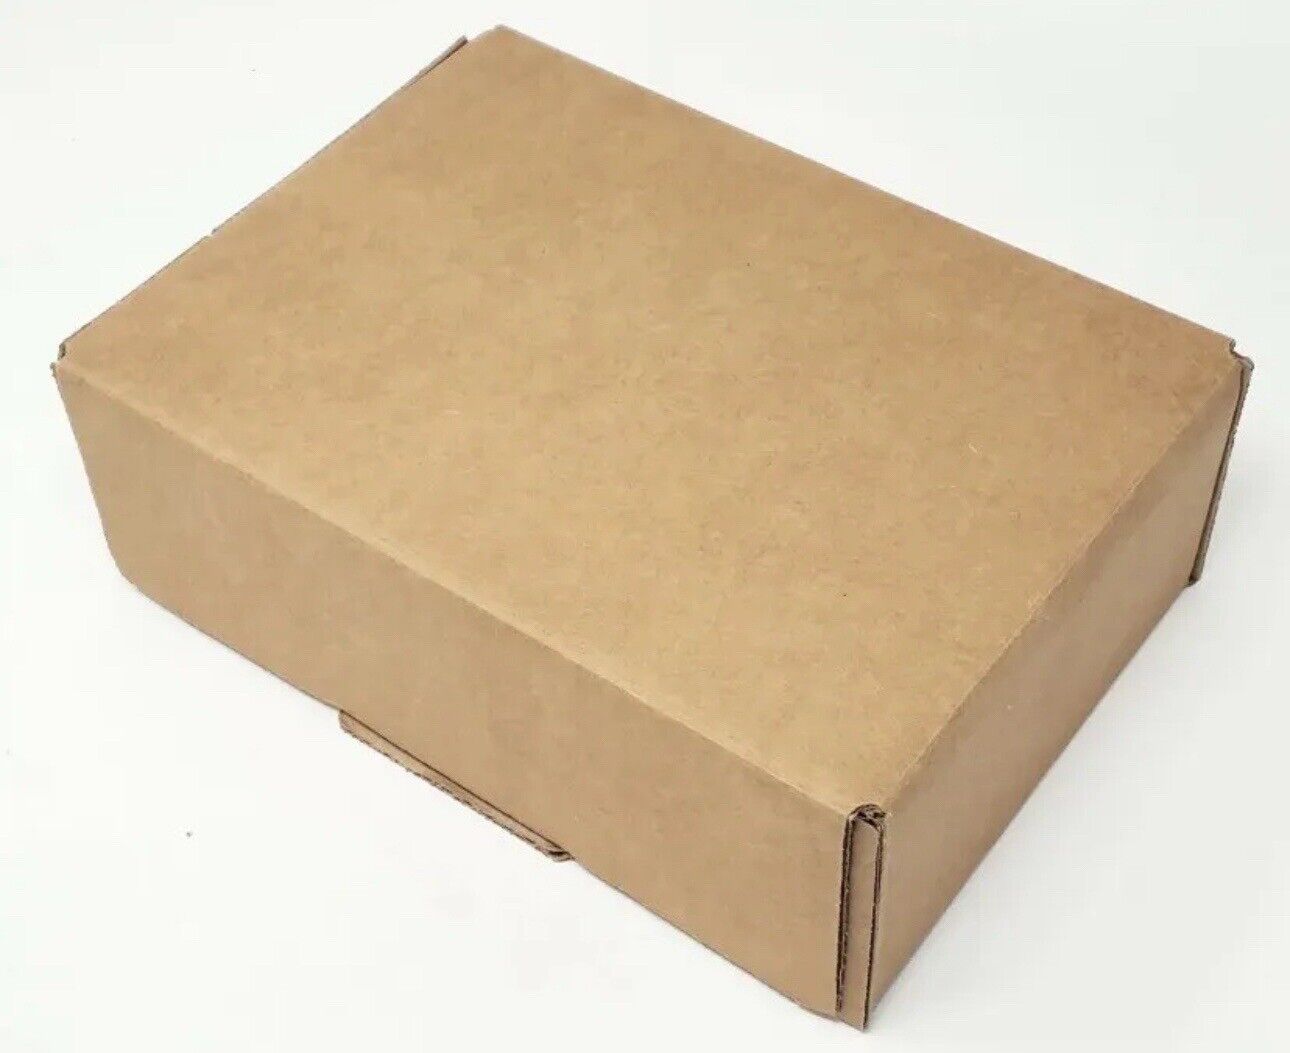 50 12x10x3 Moving Box Packaging Boxes Cardboard Corrugated Packing Shipping 